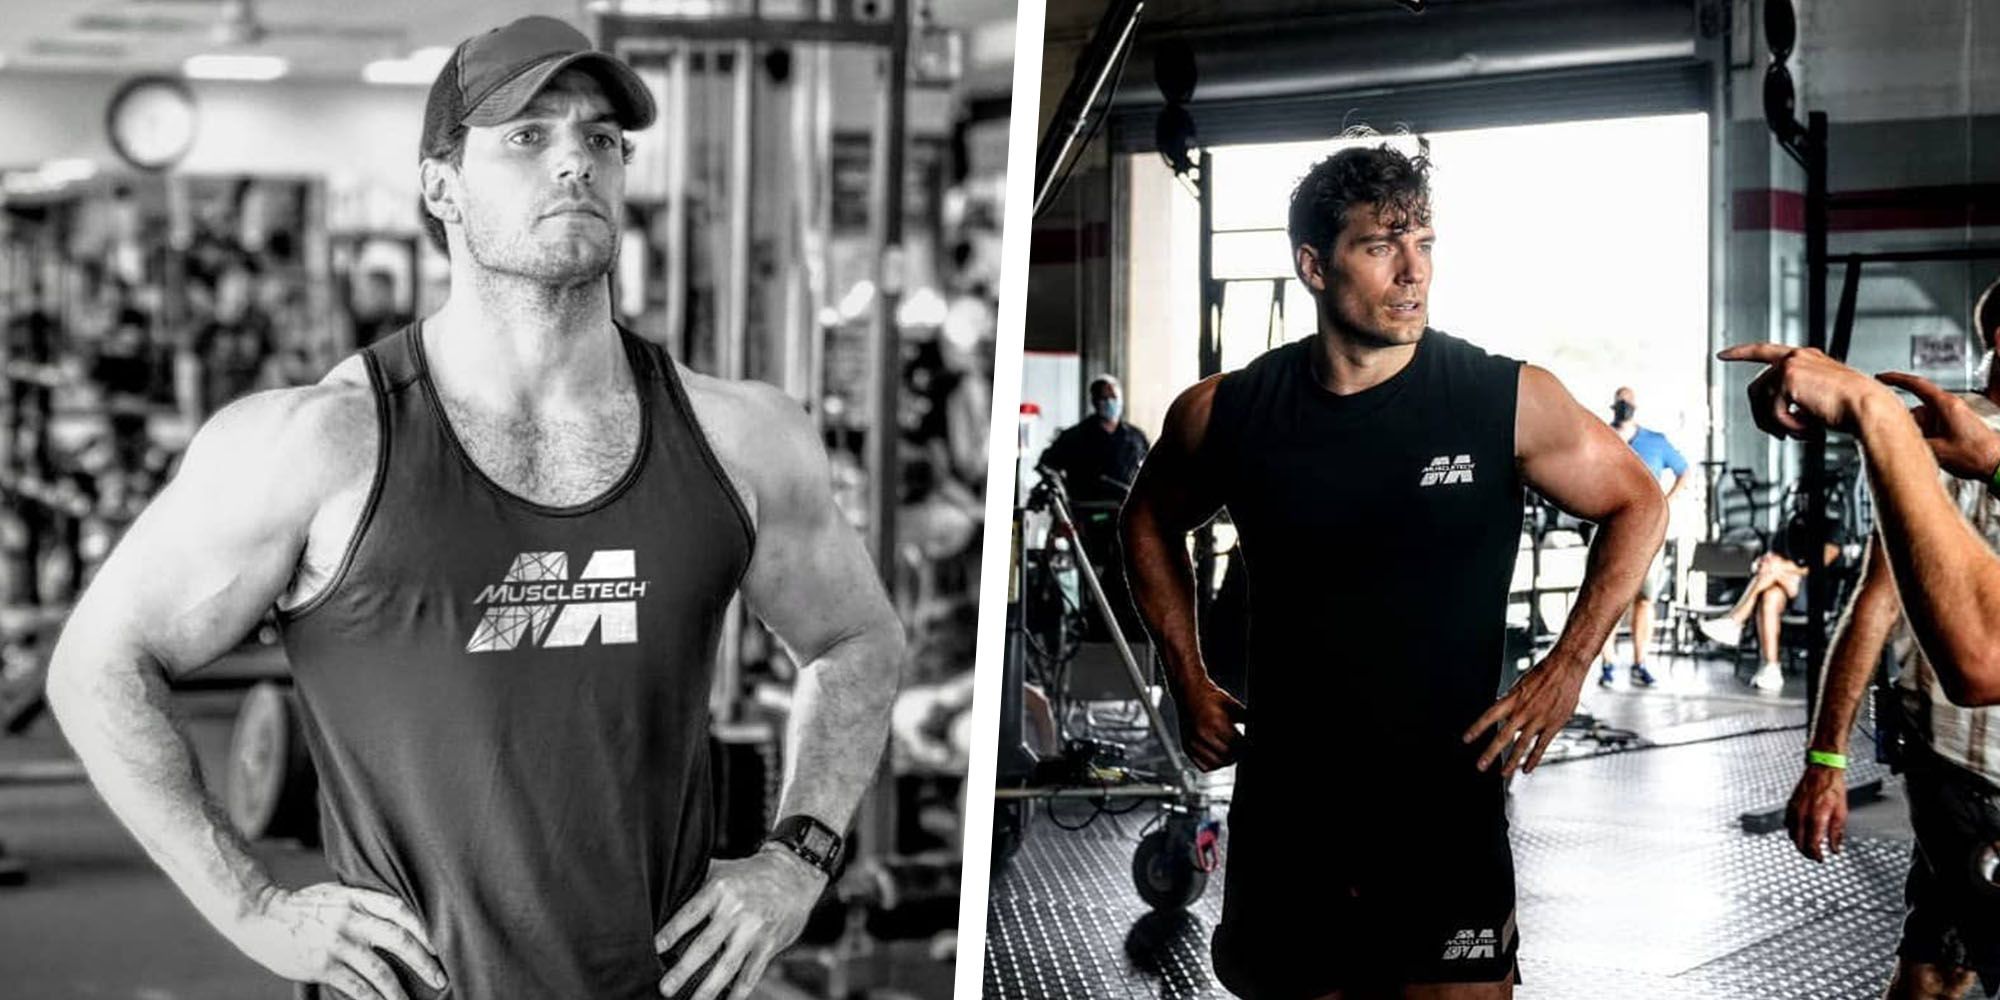 Henry Cavill - I don't always workout, but when I do, I workout with  Superman. #Superman #GymStuff FLEX GYM Budapest